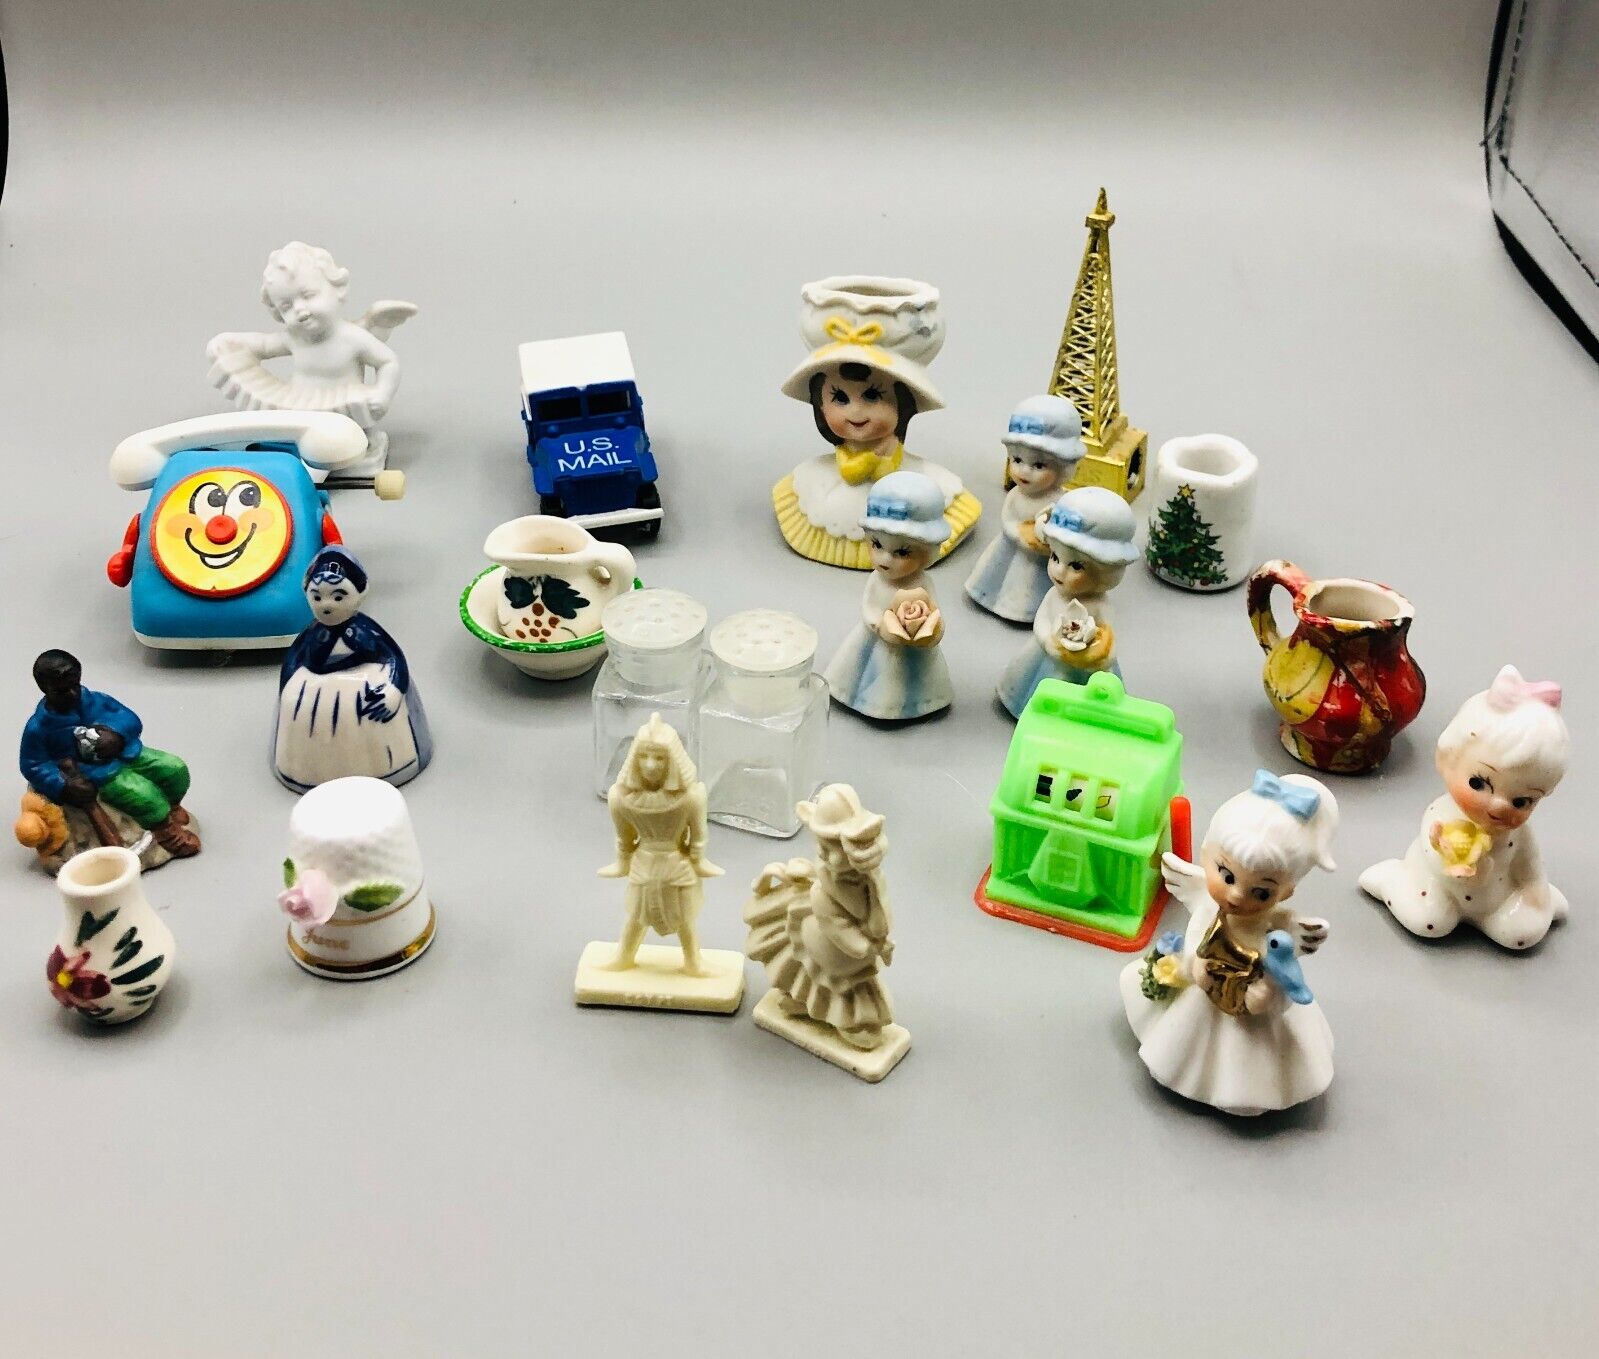 Lot of 22 different minature items for collectors